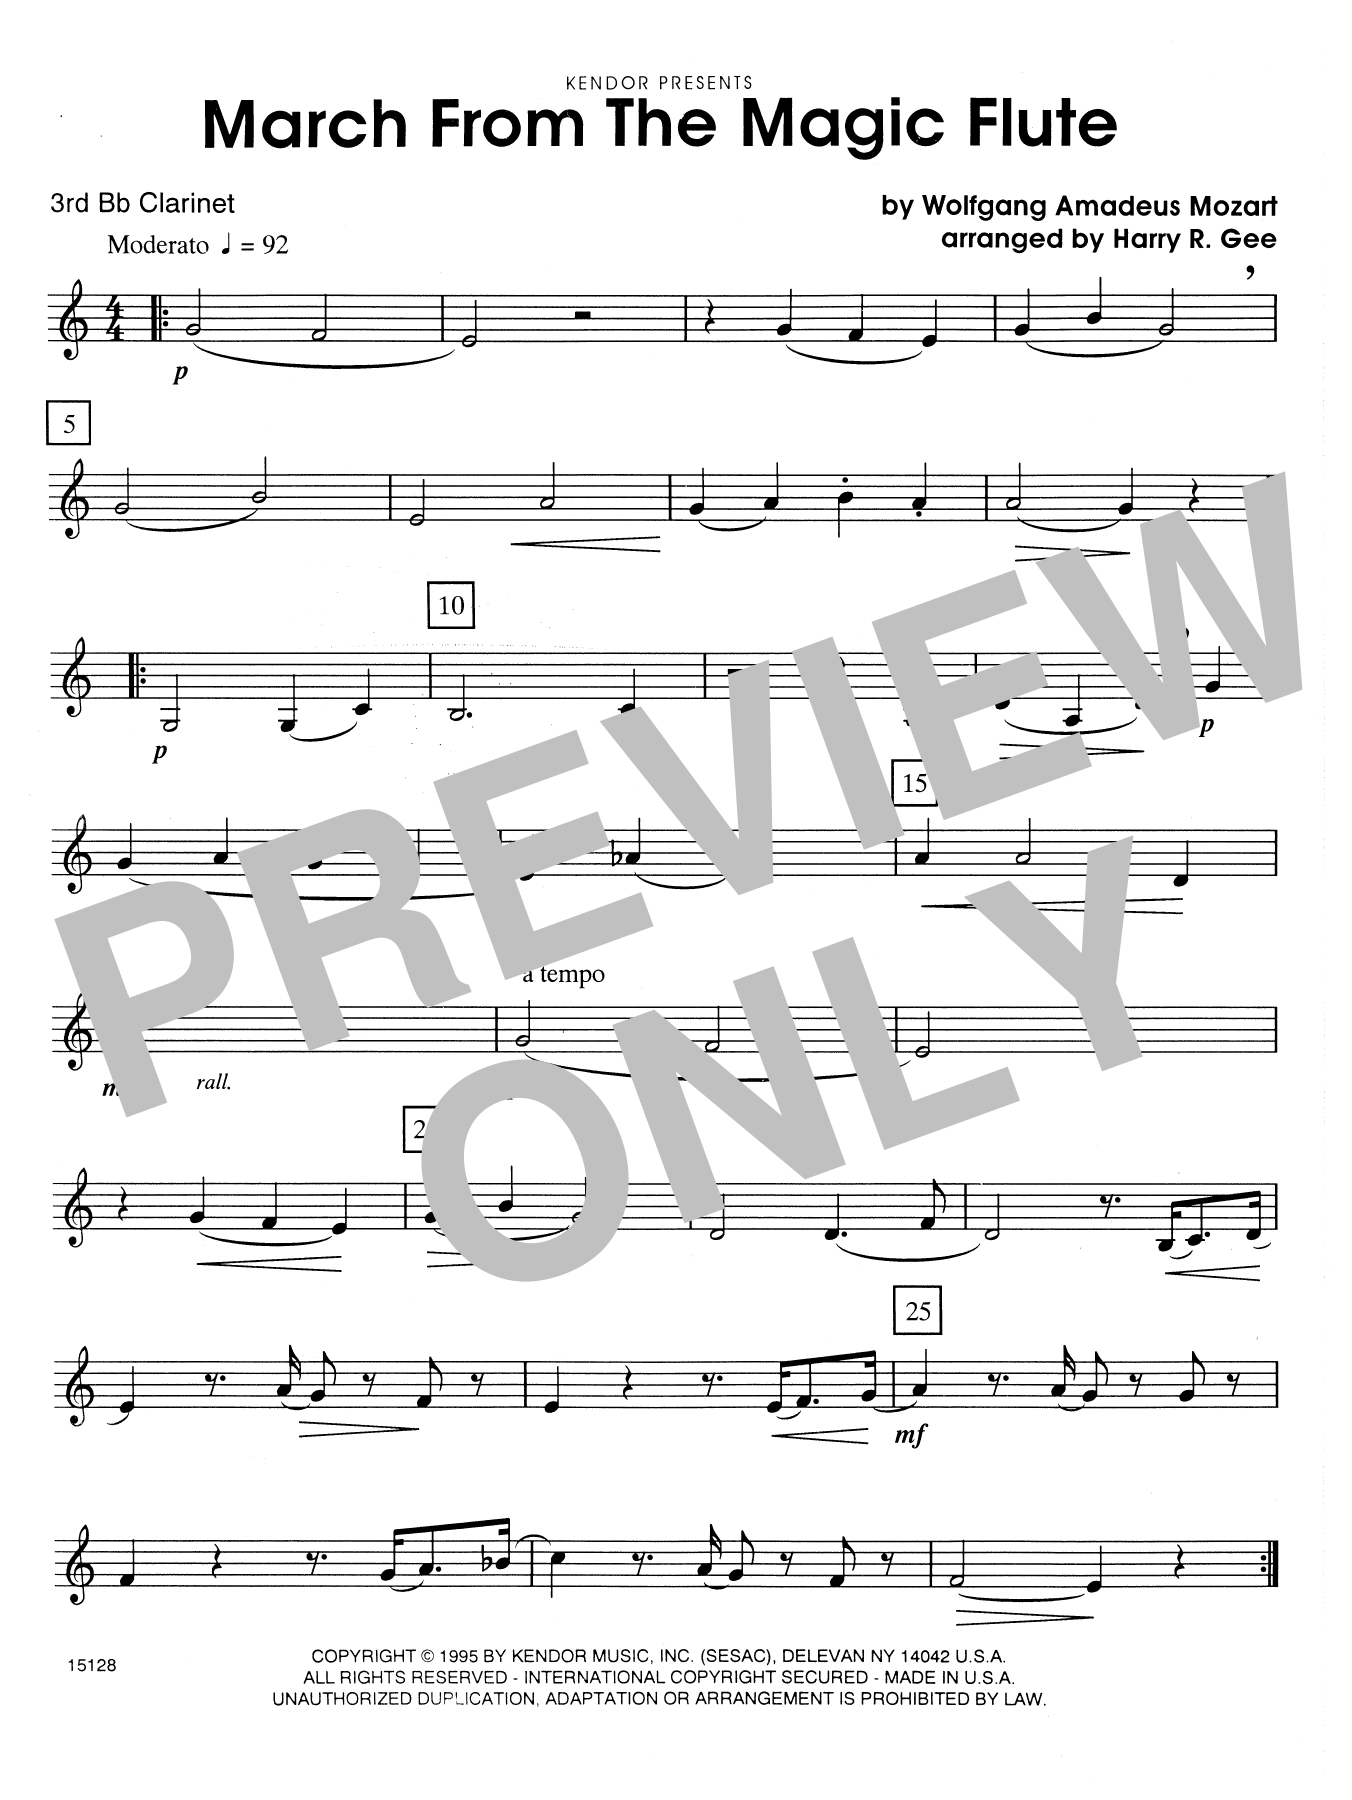 Download Harry R. Gee March From The Magic Flute - 3rd Bb Cla Sheet Music